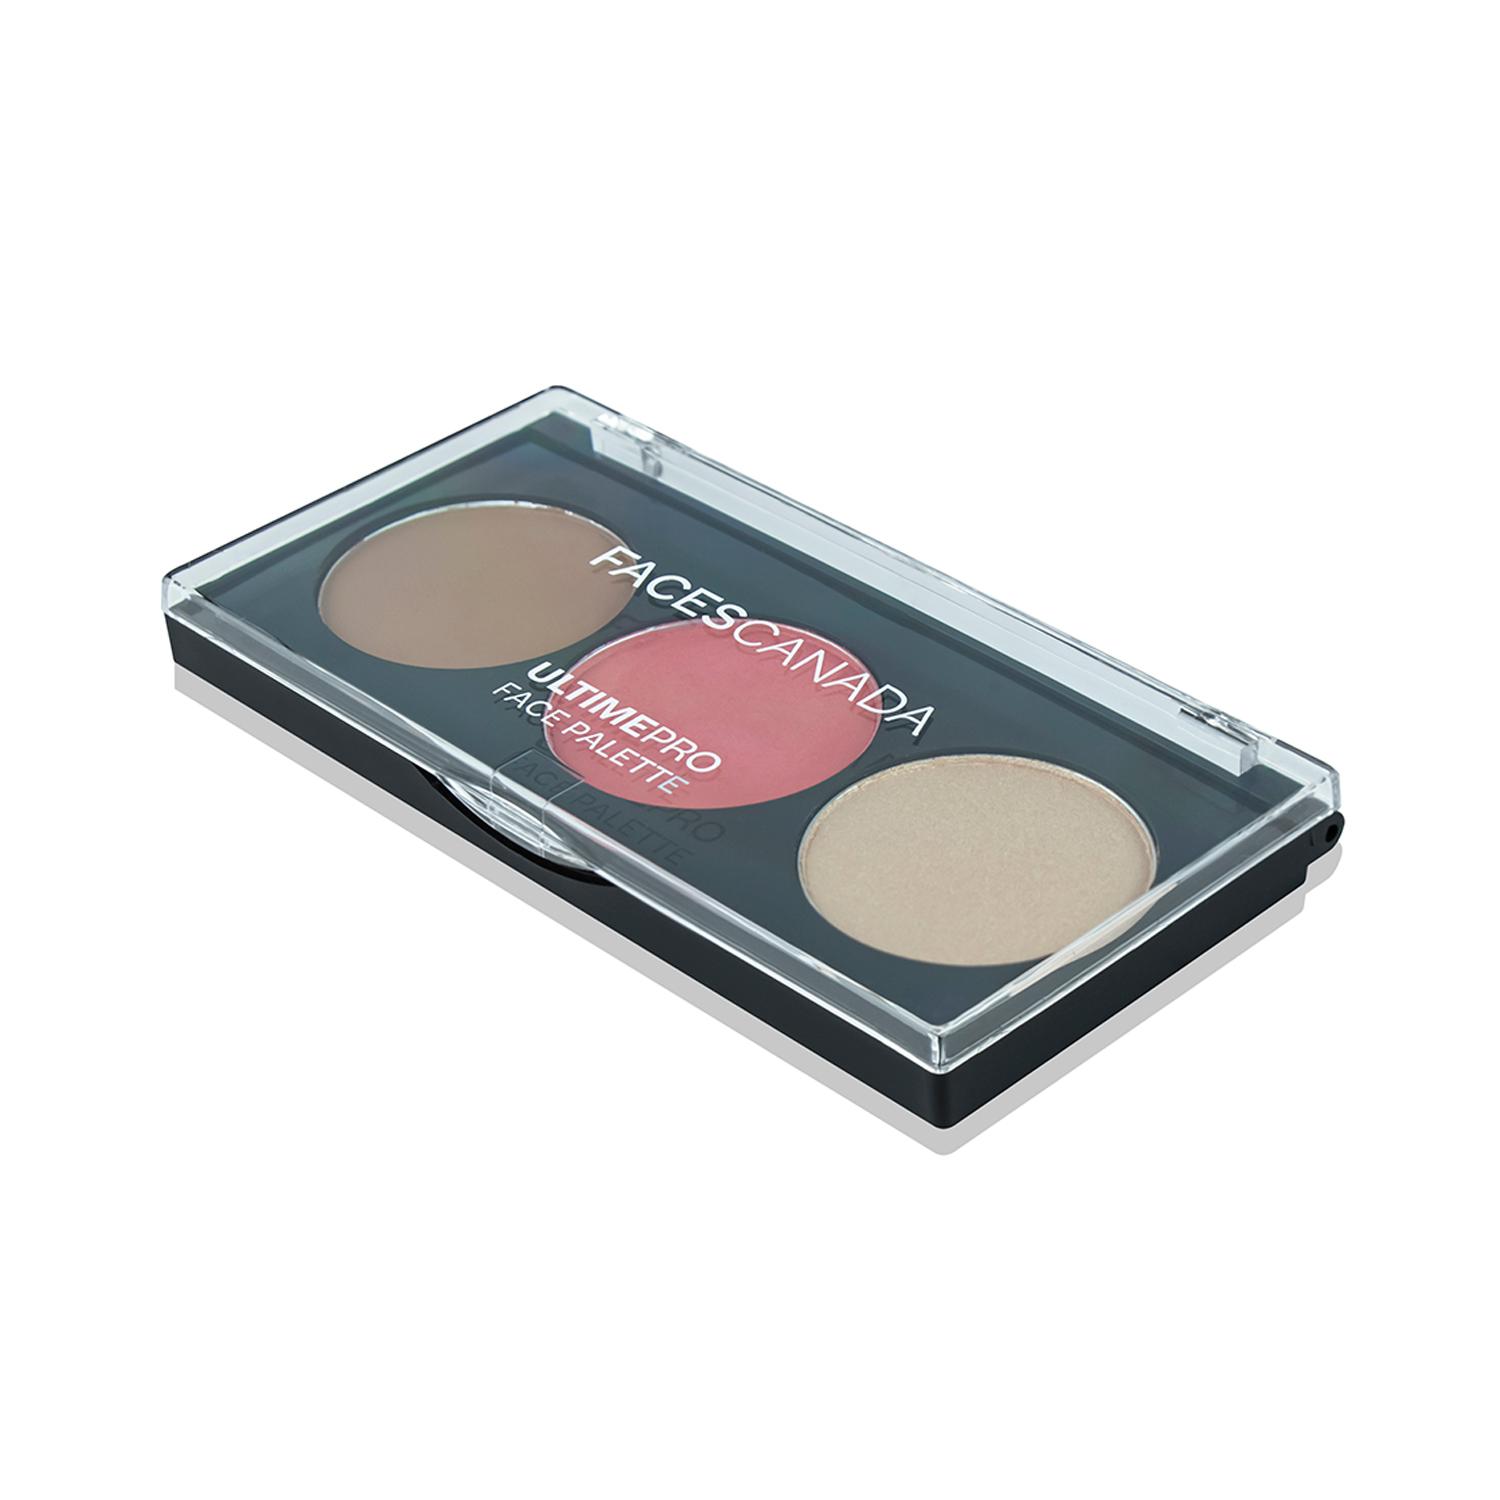 Faces Canada | Faces Canada Ultime Pro Face Palette - Shine, 3in1 Bronzer+Highlighter+Blush, Shimmer Finish (12 g)